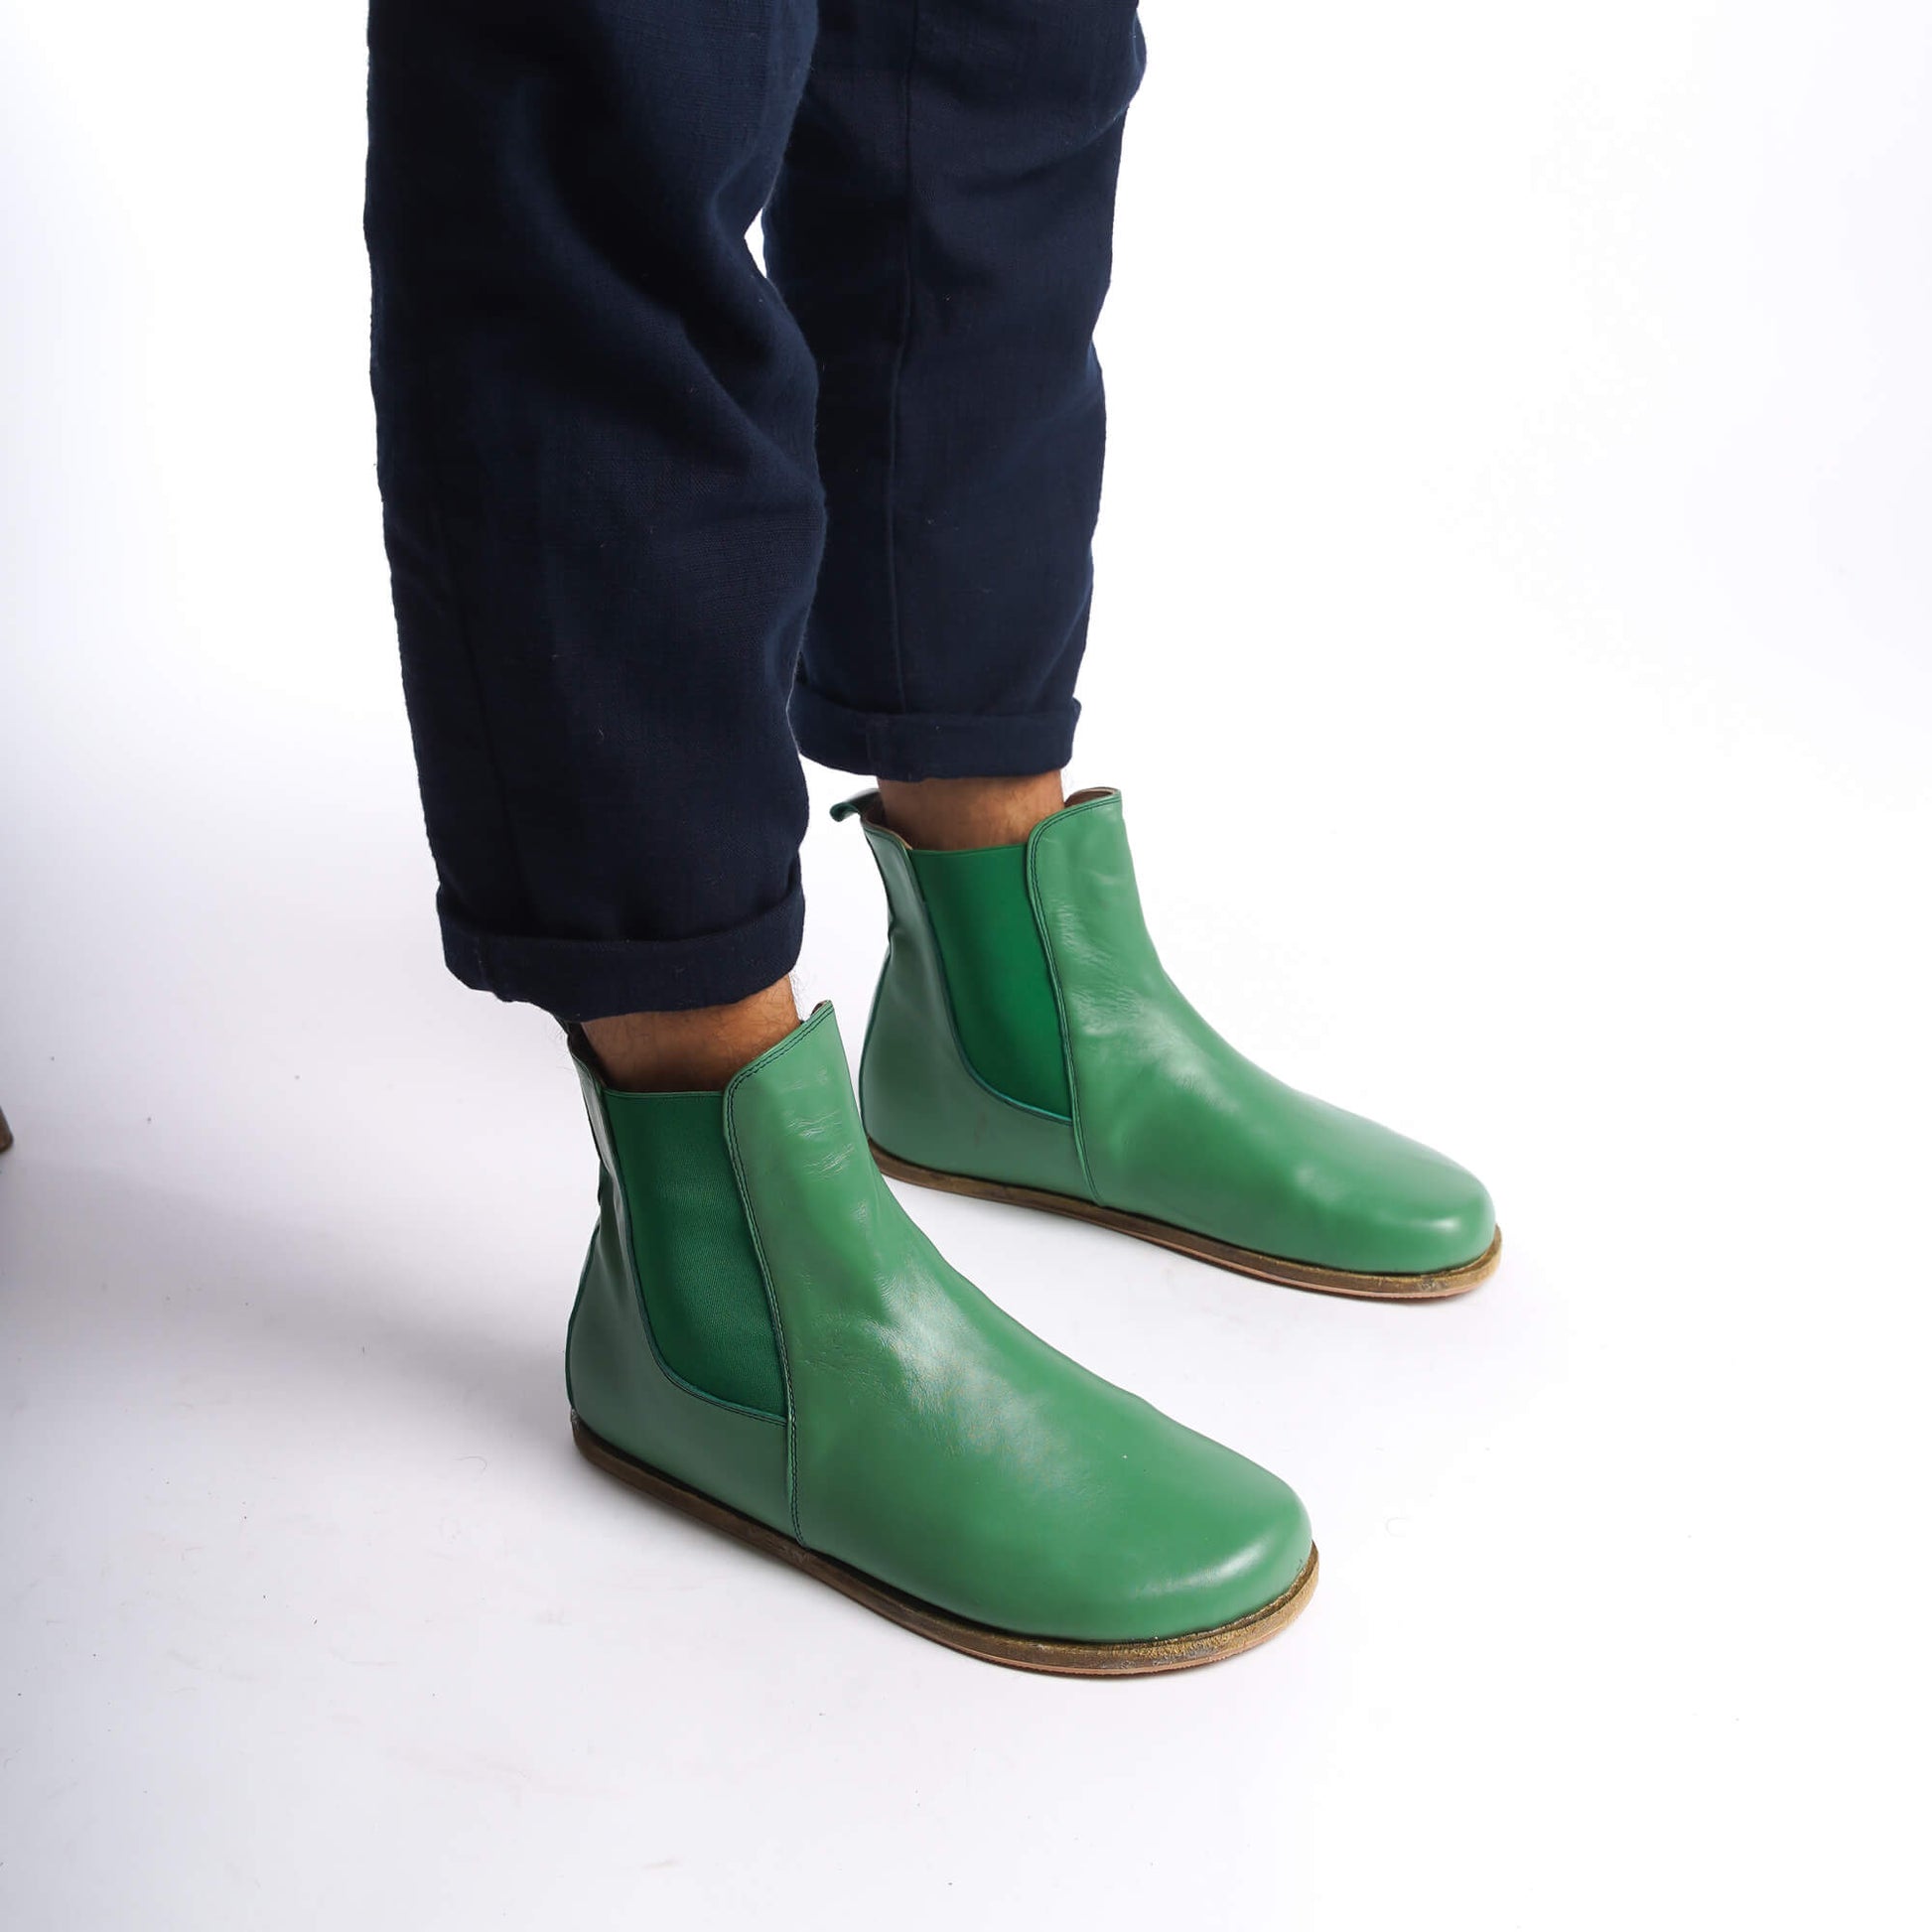 Green leather Chelsea boots for men, perfect for making a unique style statement, with a slip-on design.